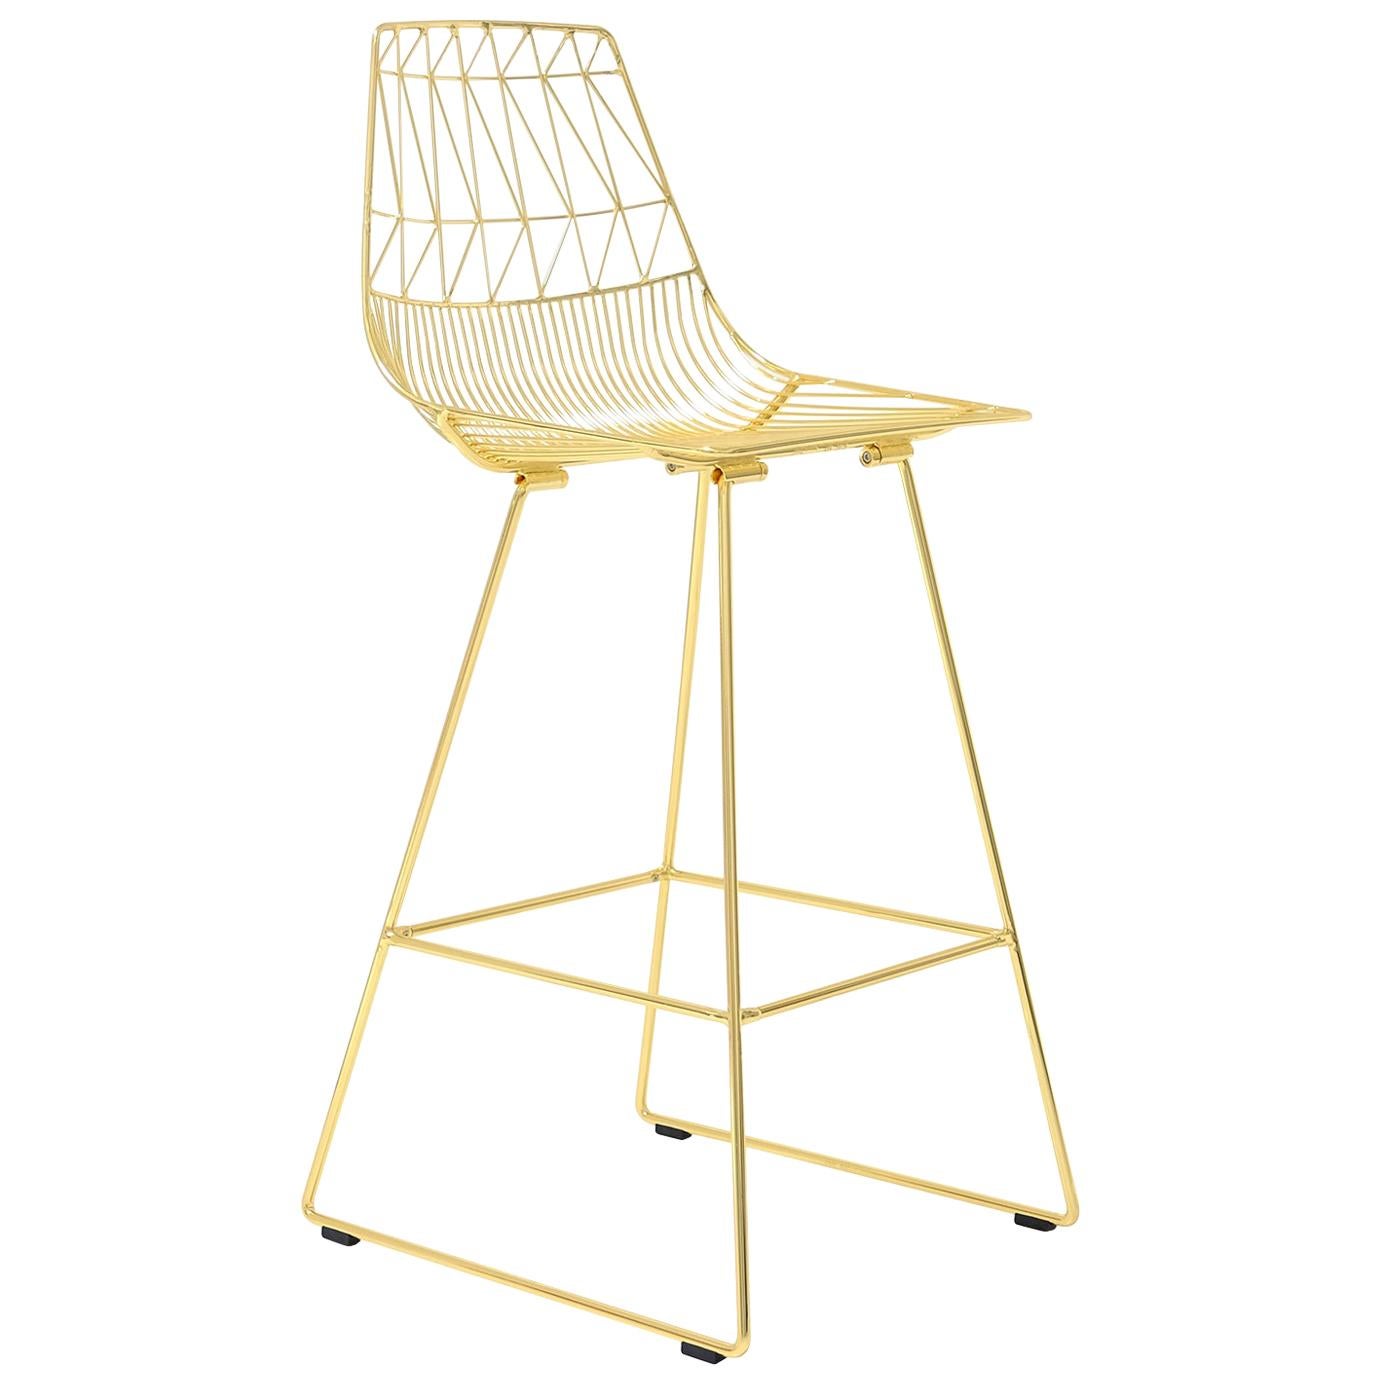 Mid-Century Modern, Minimalist Wire Bar Stool, in Gold by Bend Goods